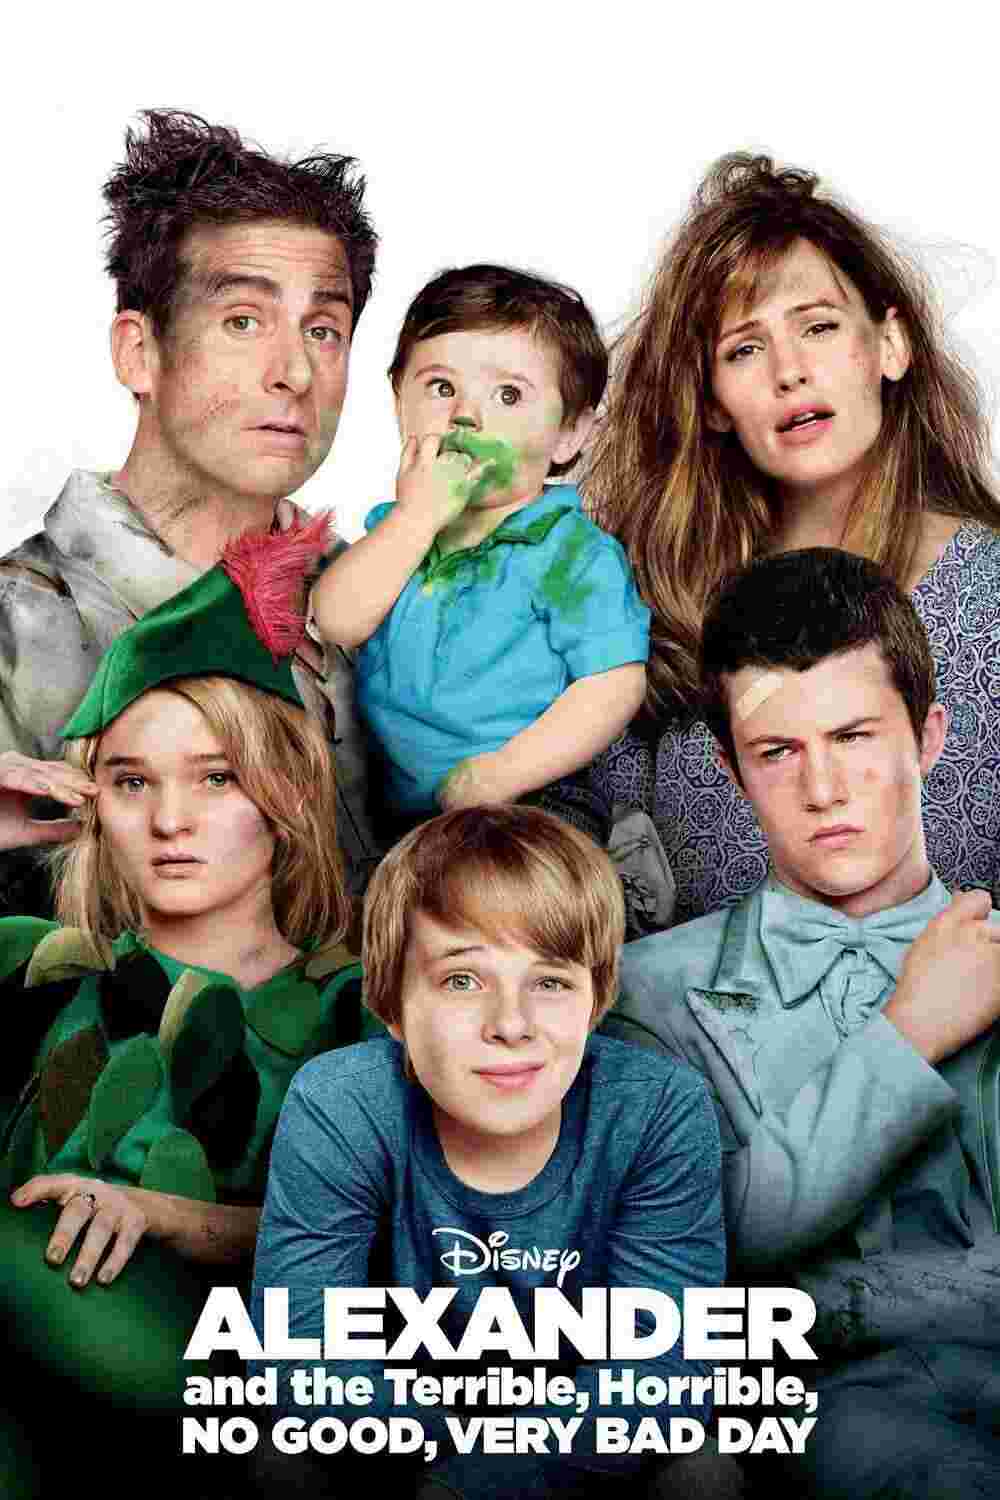 Alexander and the Terrible, Horrible, No Good, Very Bad Day (2014) Steve Carell